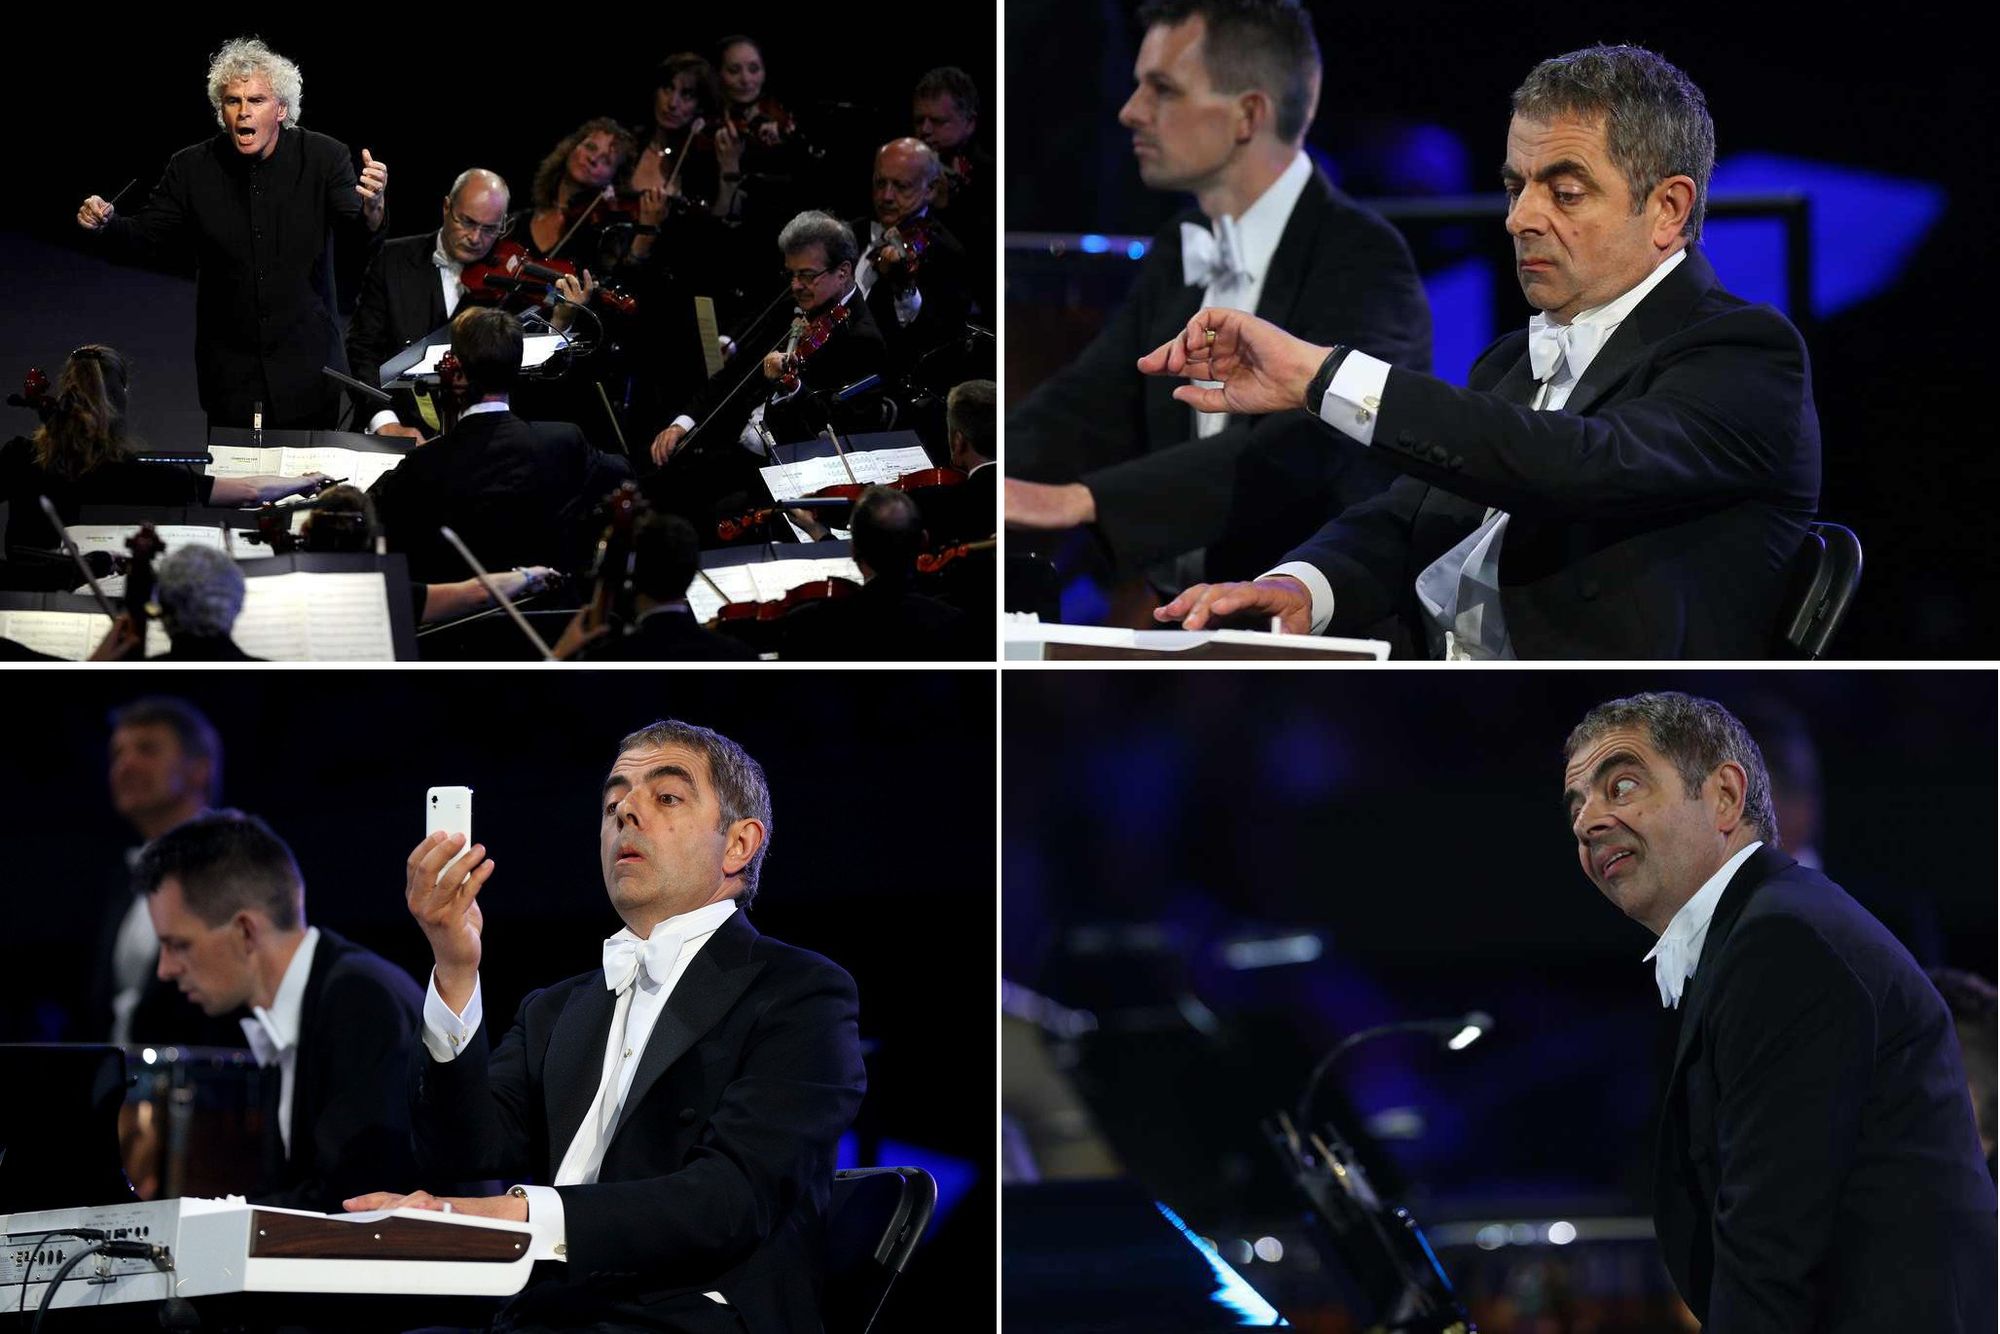 Mr Bean at the London 2012 Olympics Opening Ceremony